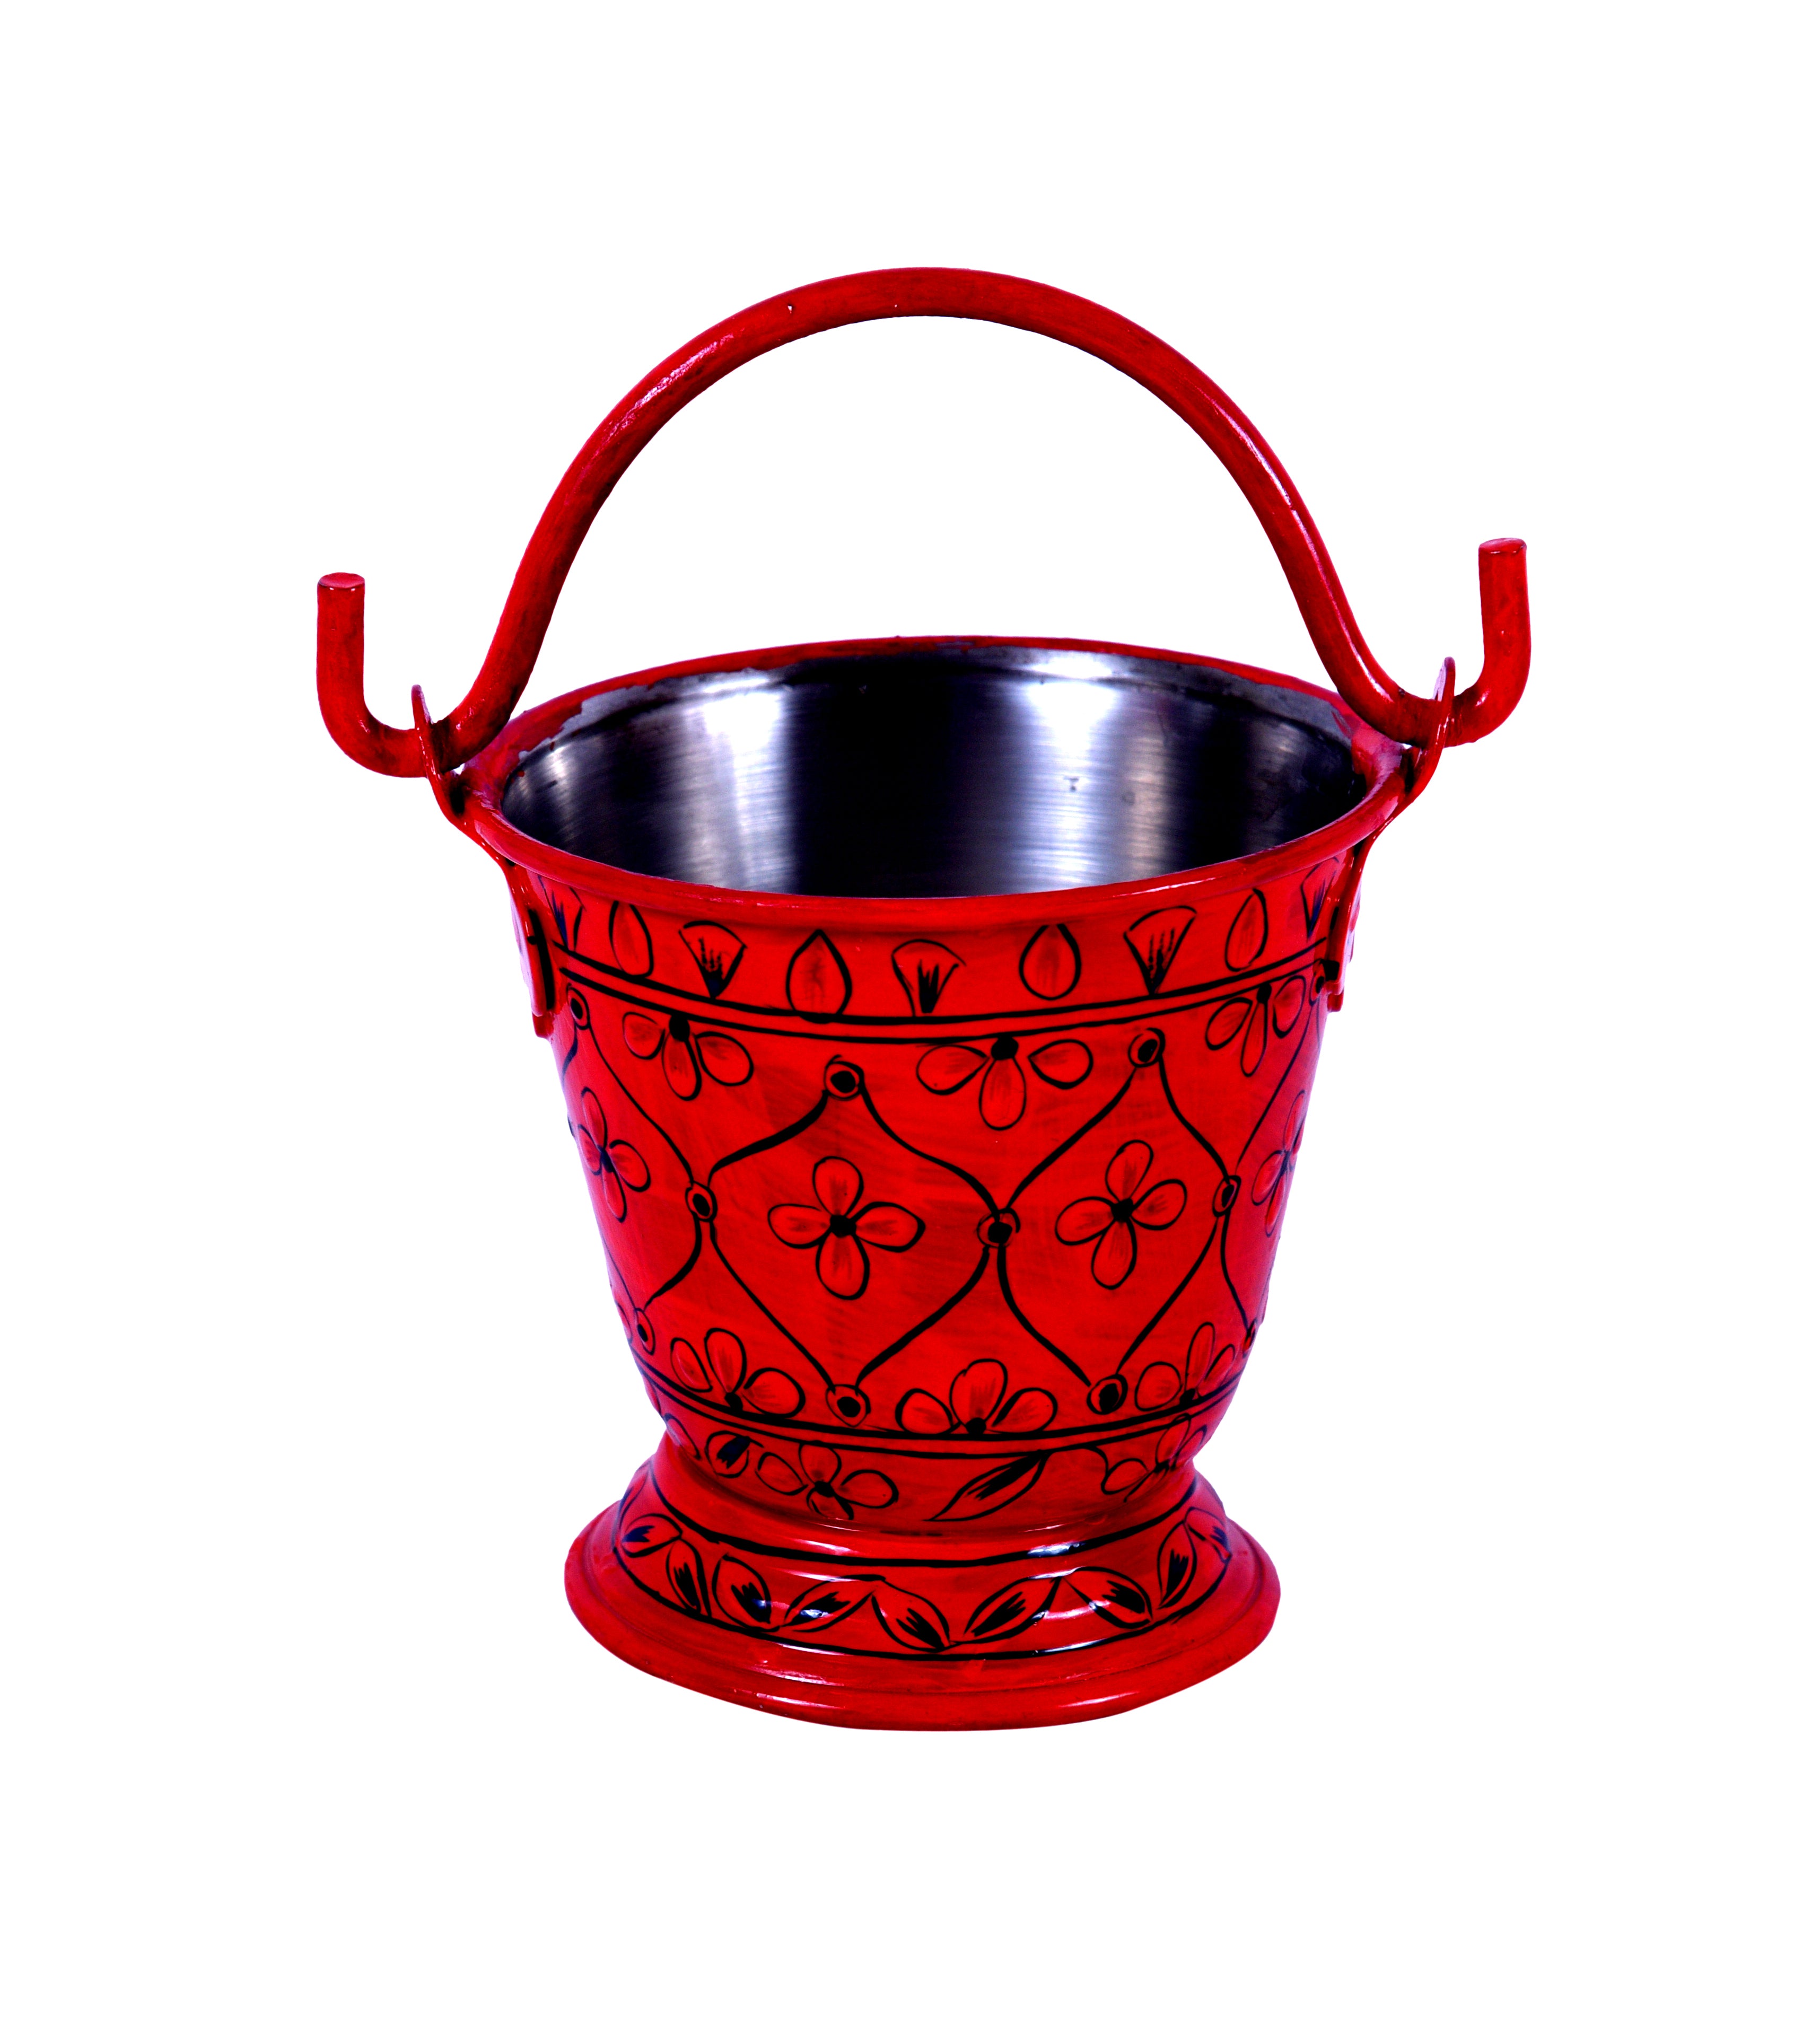 Hand Painted Small Bucket Perfect for tapas dishes nibbles & dips And Dal